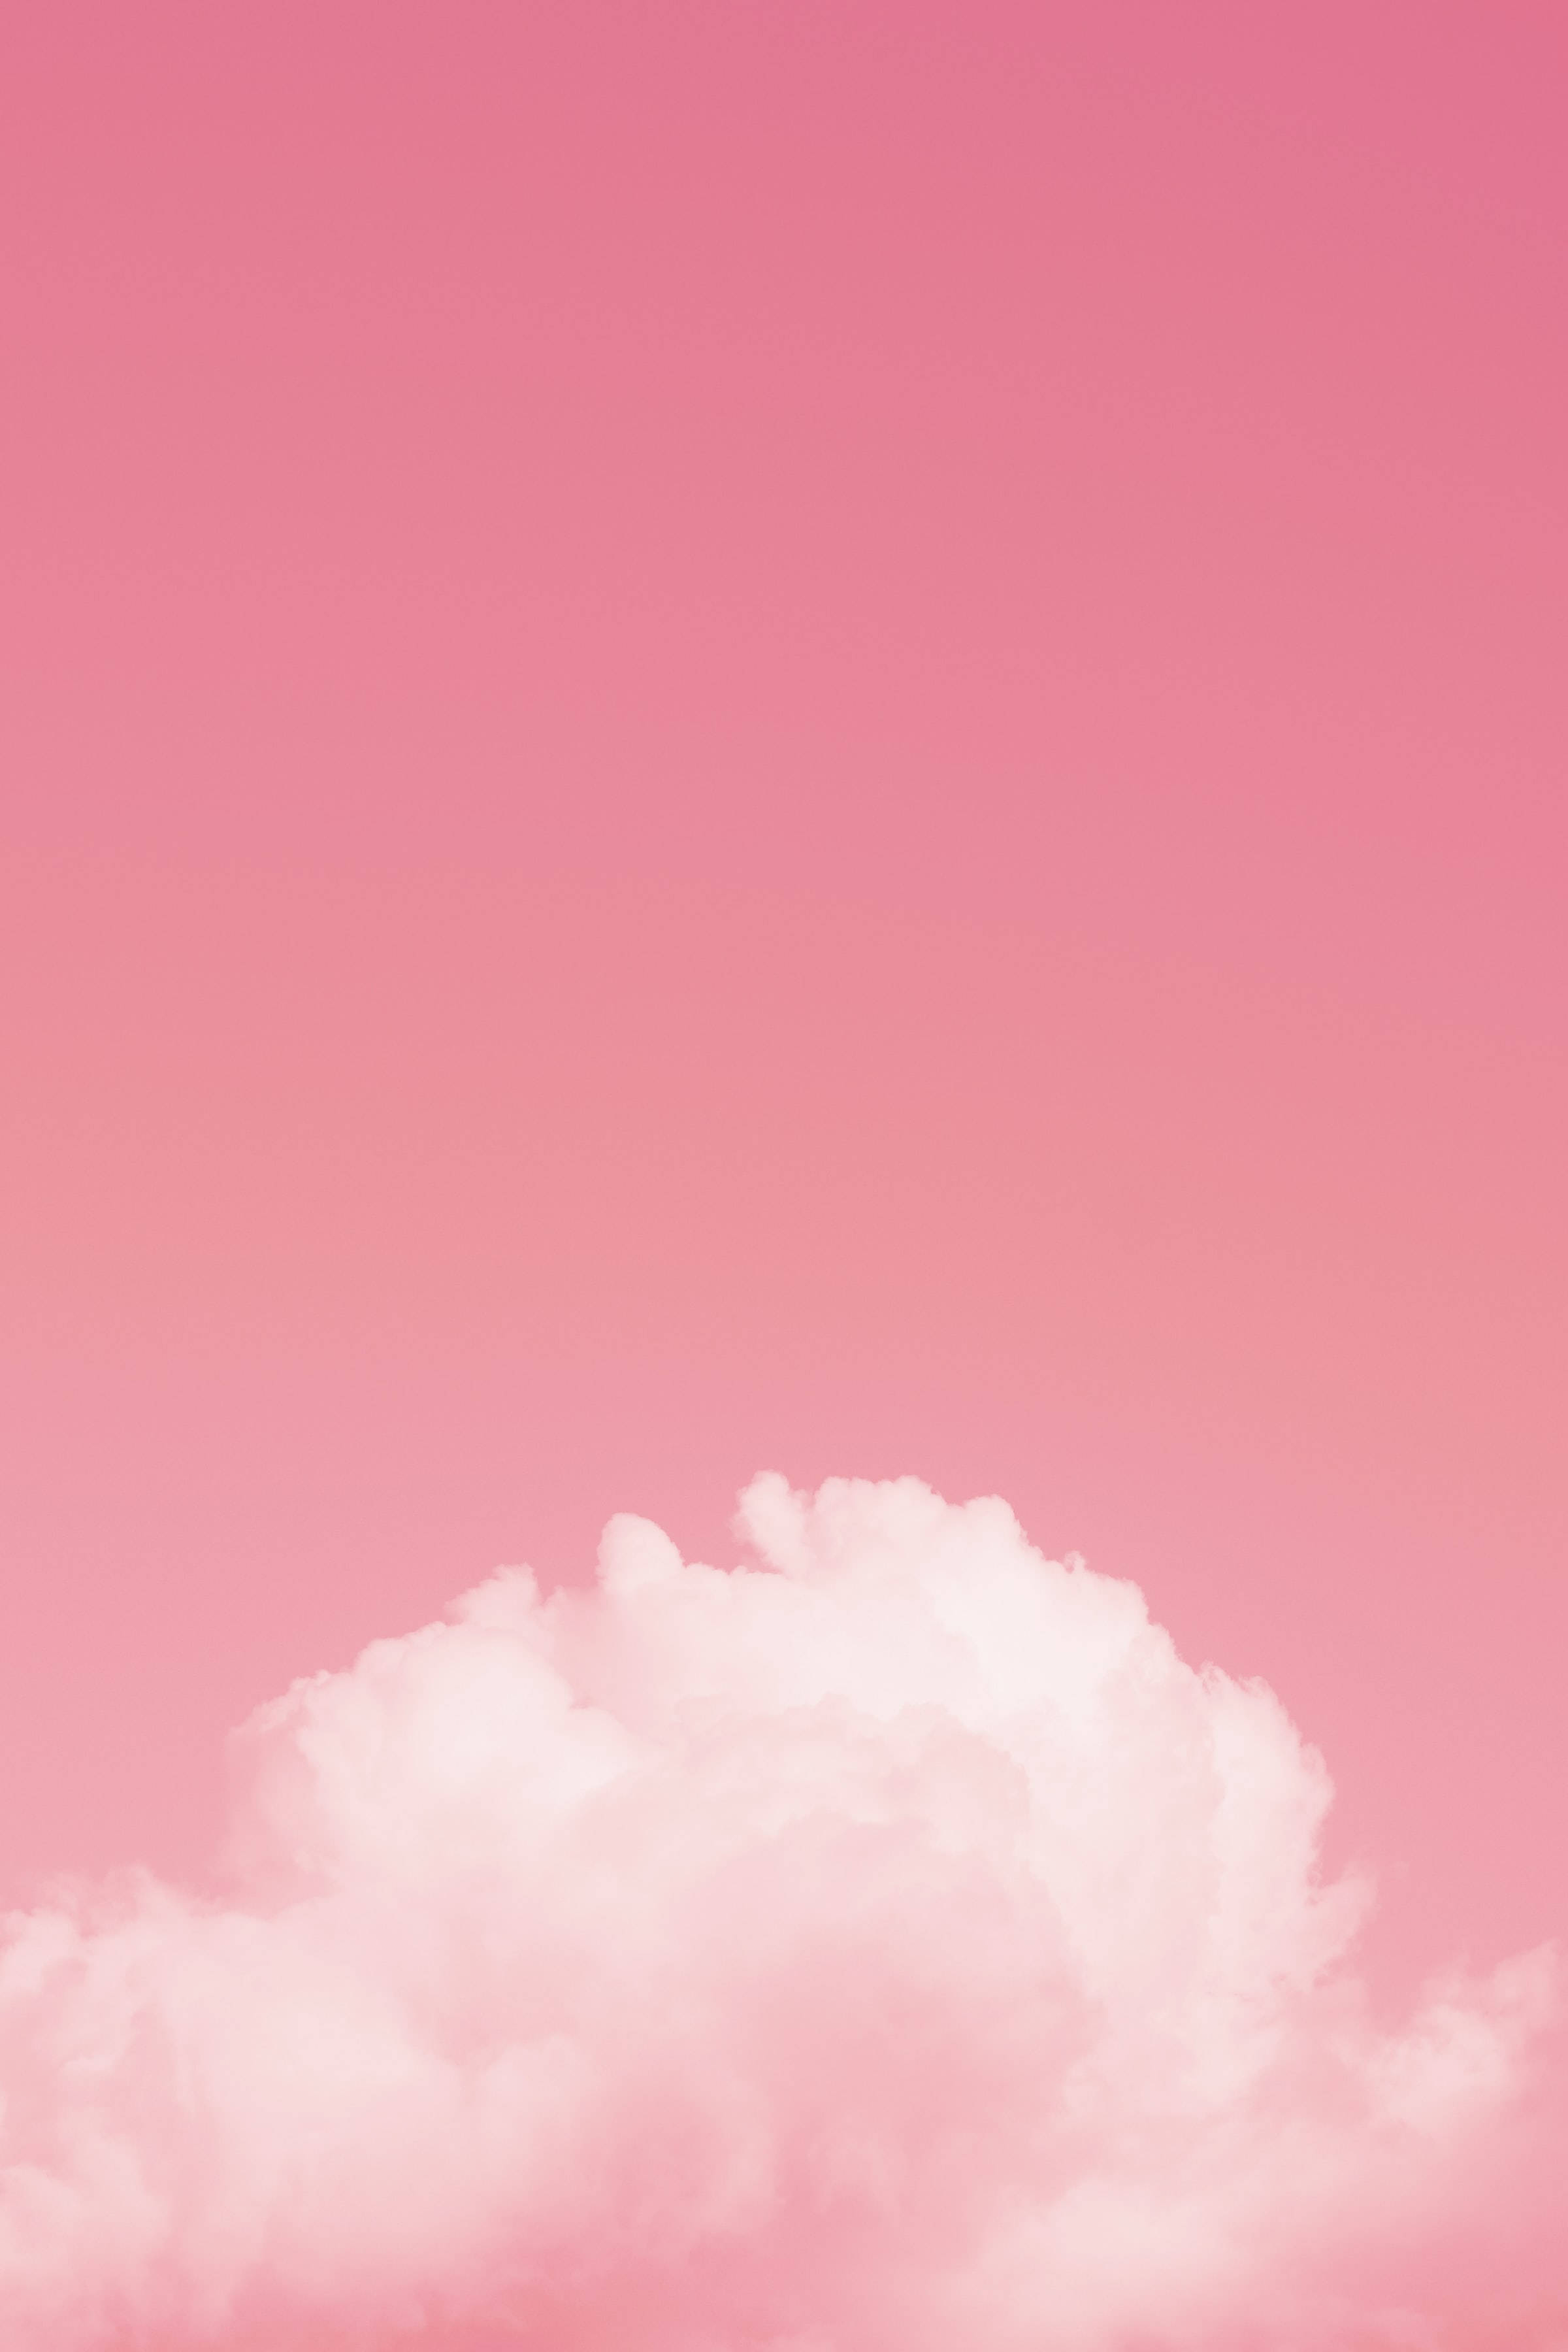 Cute Pink Aesthetic White Fluffy Cloud Wallpaper